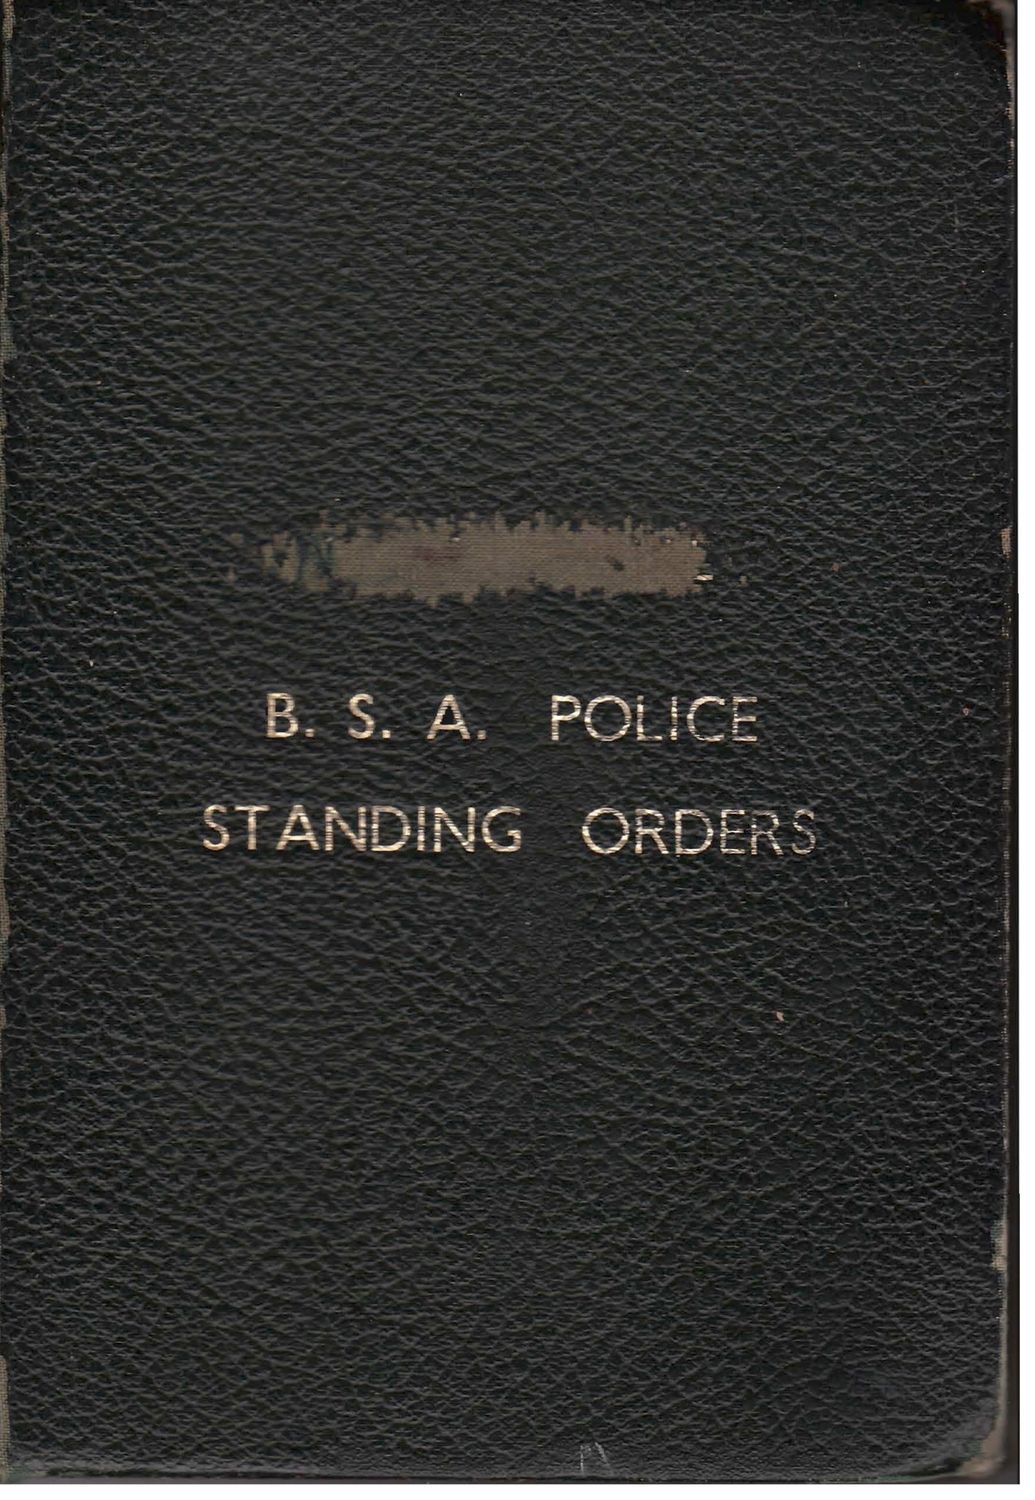 B.S.A. Police Standing Orders